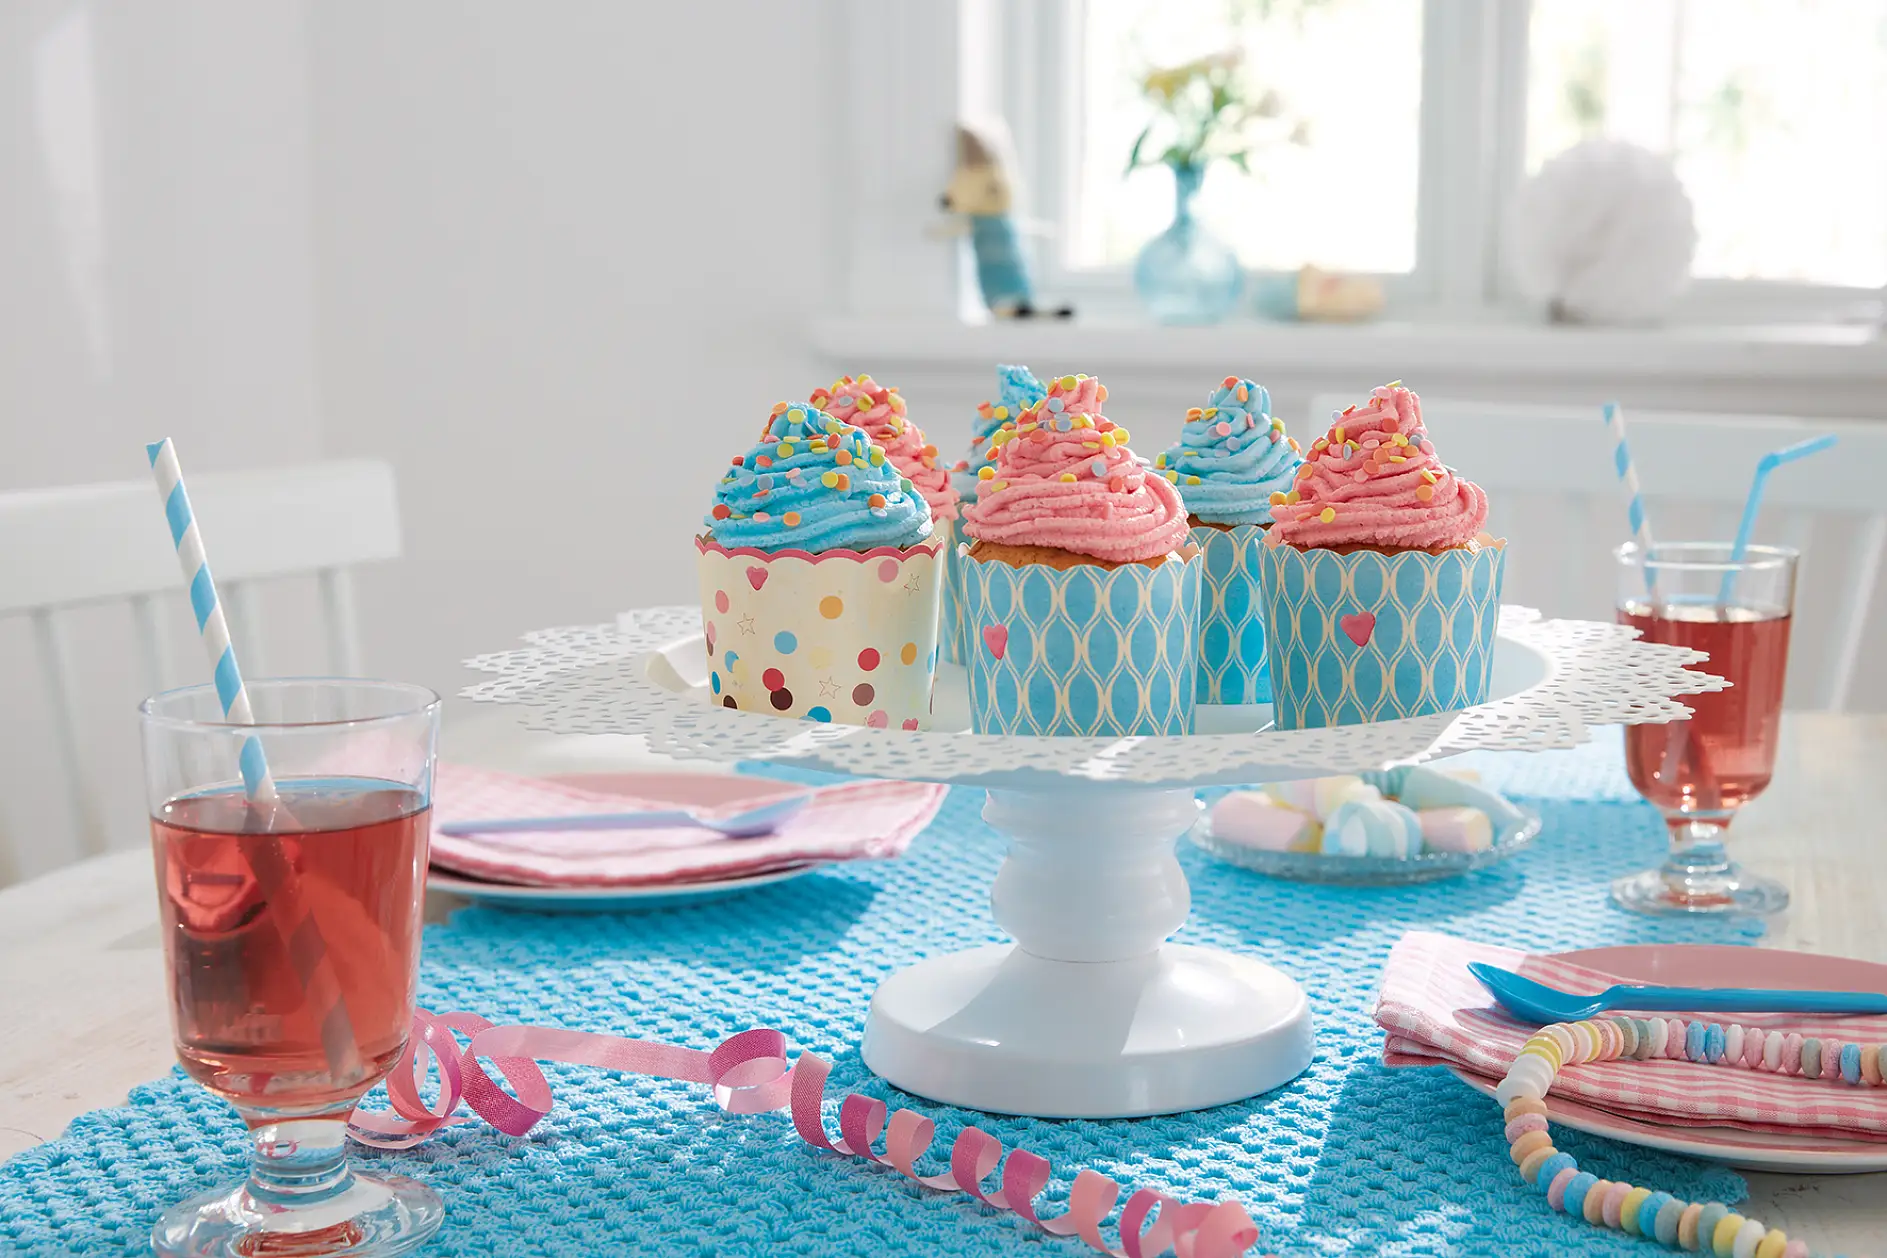 tesa Powerbond® INDOOR can be used for so much more than mounting pictures. Use it to create your own cake stand and show off your home-made muffins in style.